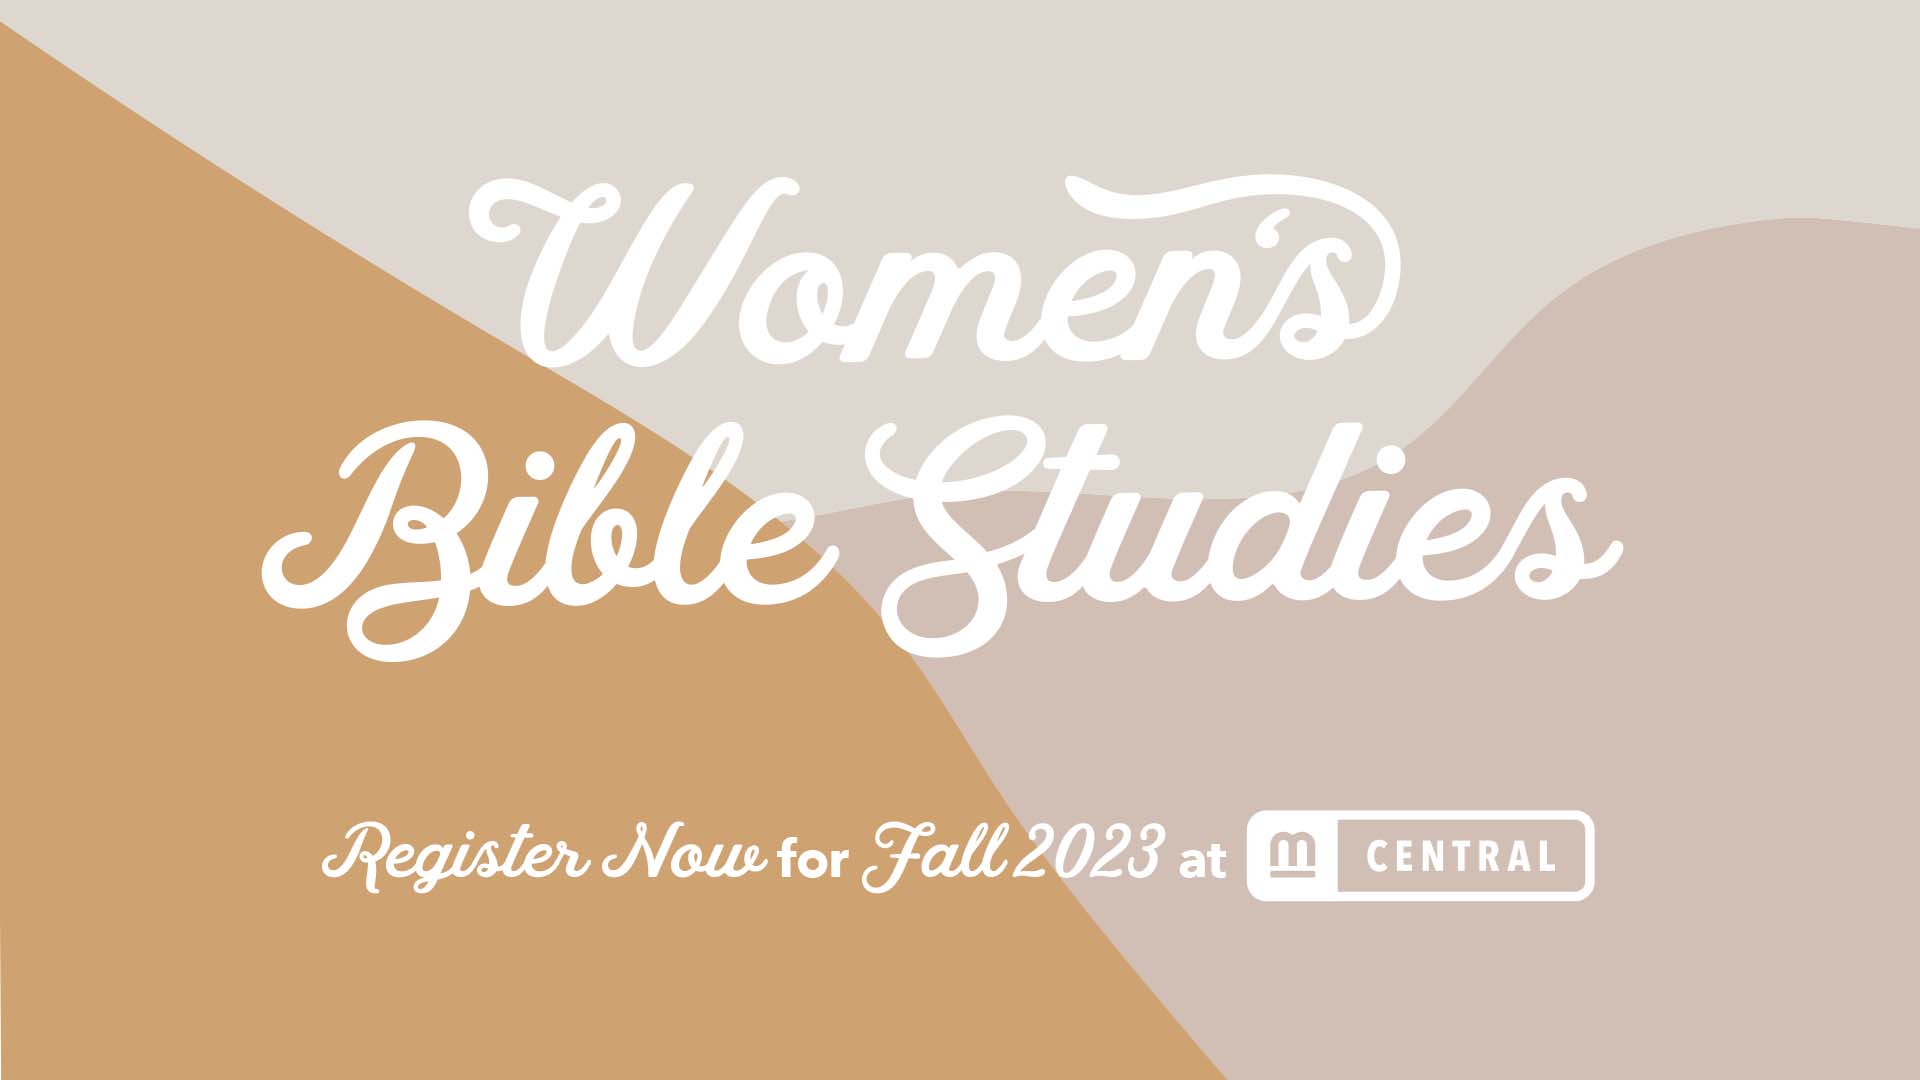 Women's Bible Study - Mission City Central